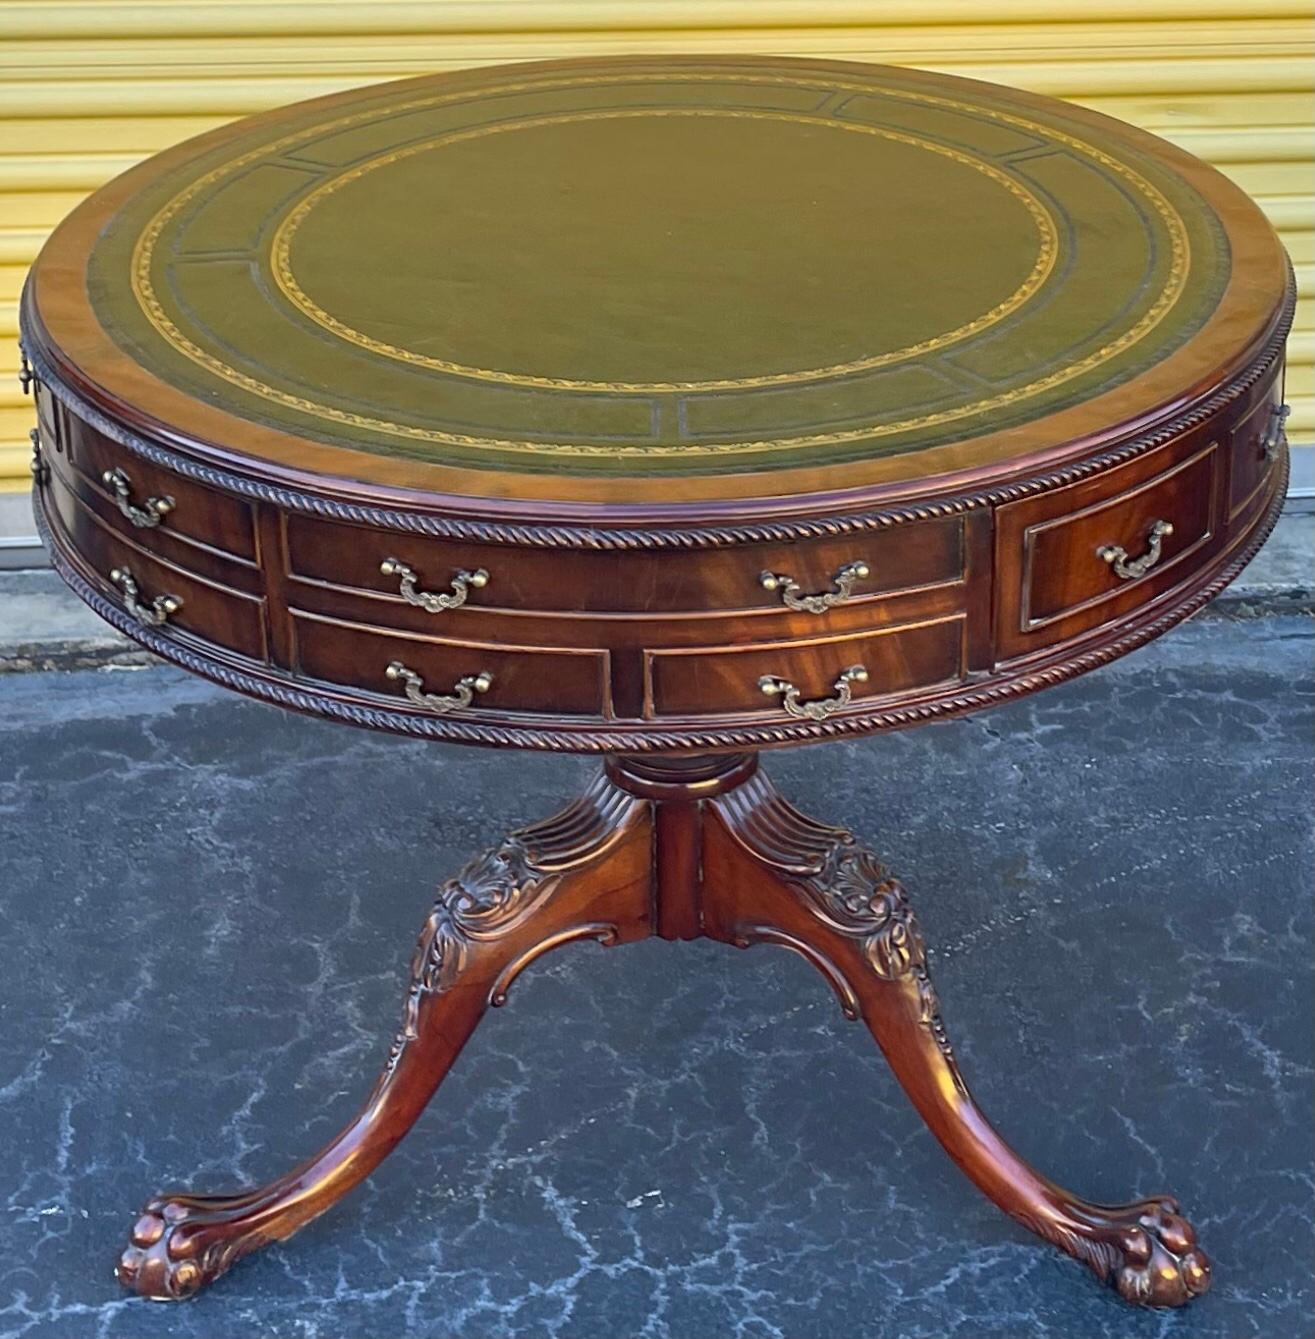 This is a lovely English drum table with Georgian styling. It has a green leather top. The frame is carved mahogany with brass hardware. The drawers have dovetail construction. It is a reproduction of a period piece and is unmarked.